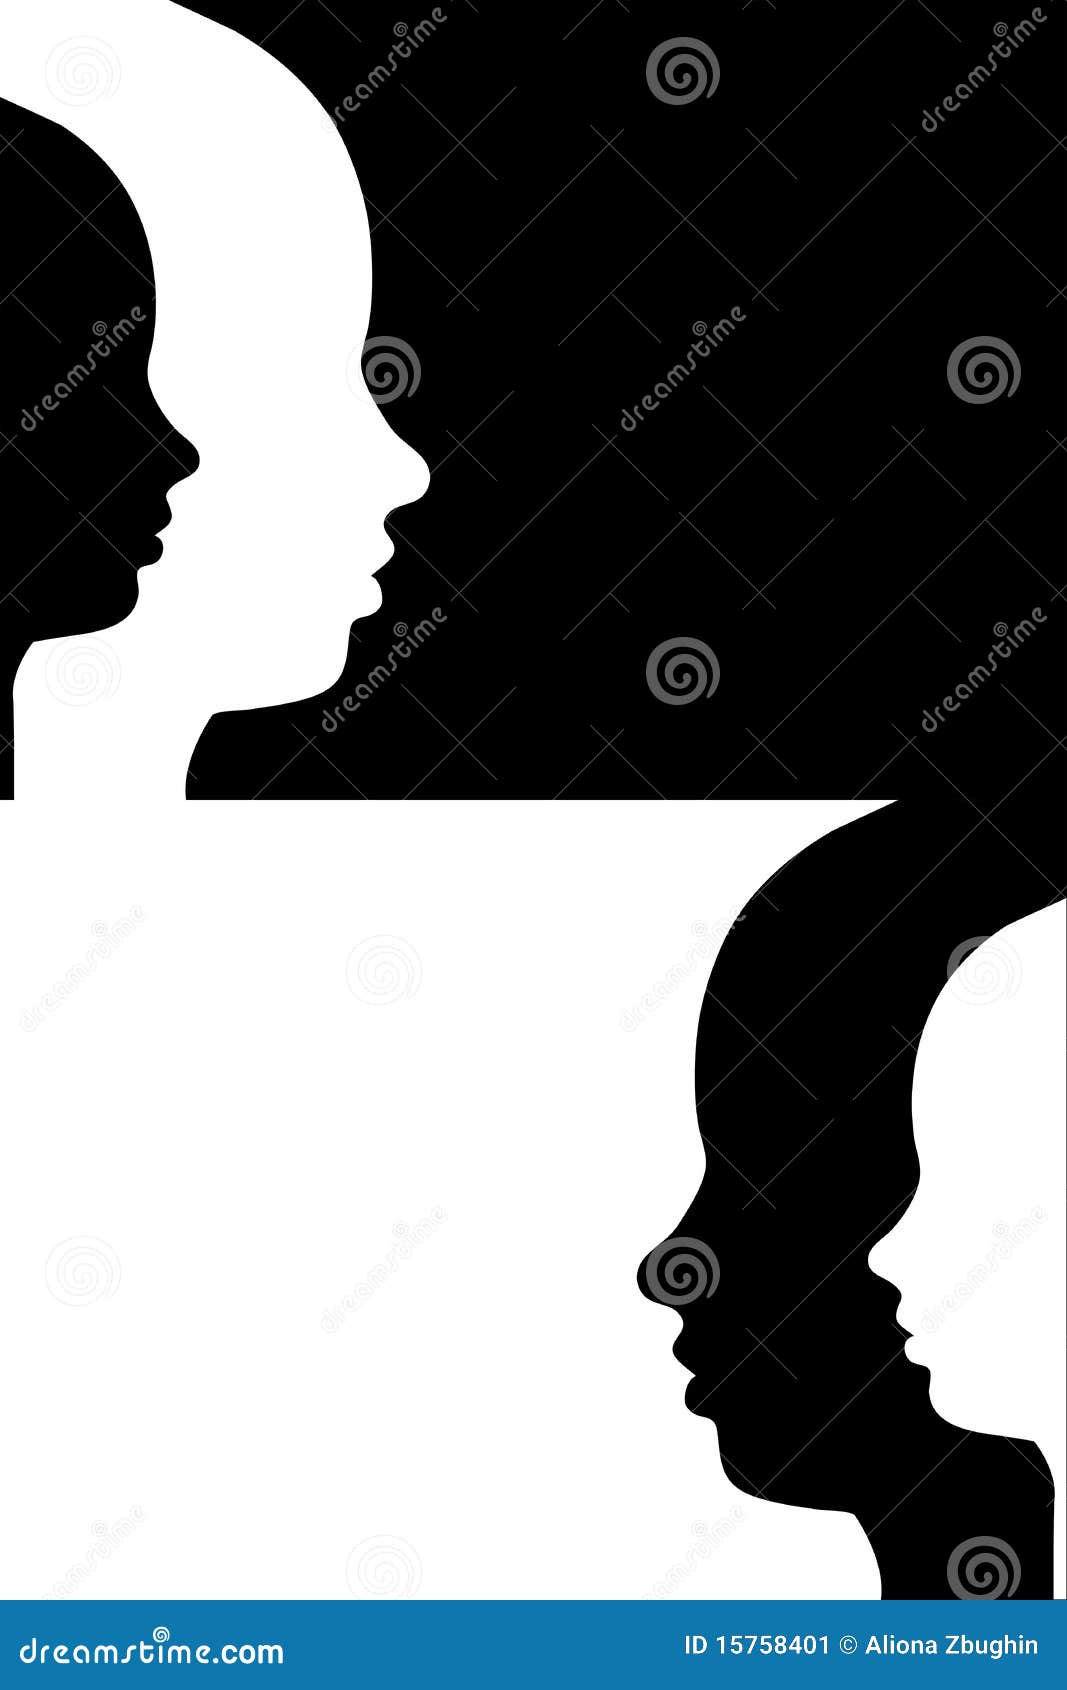 Human Face Outline Stock Image - Image: 15758401